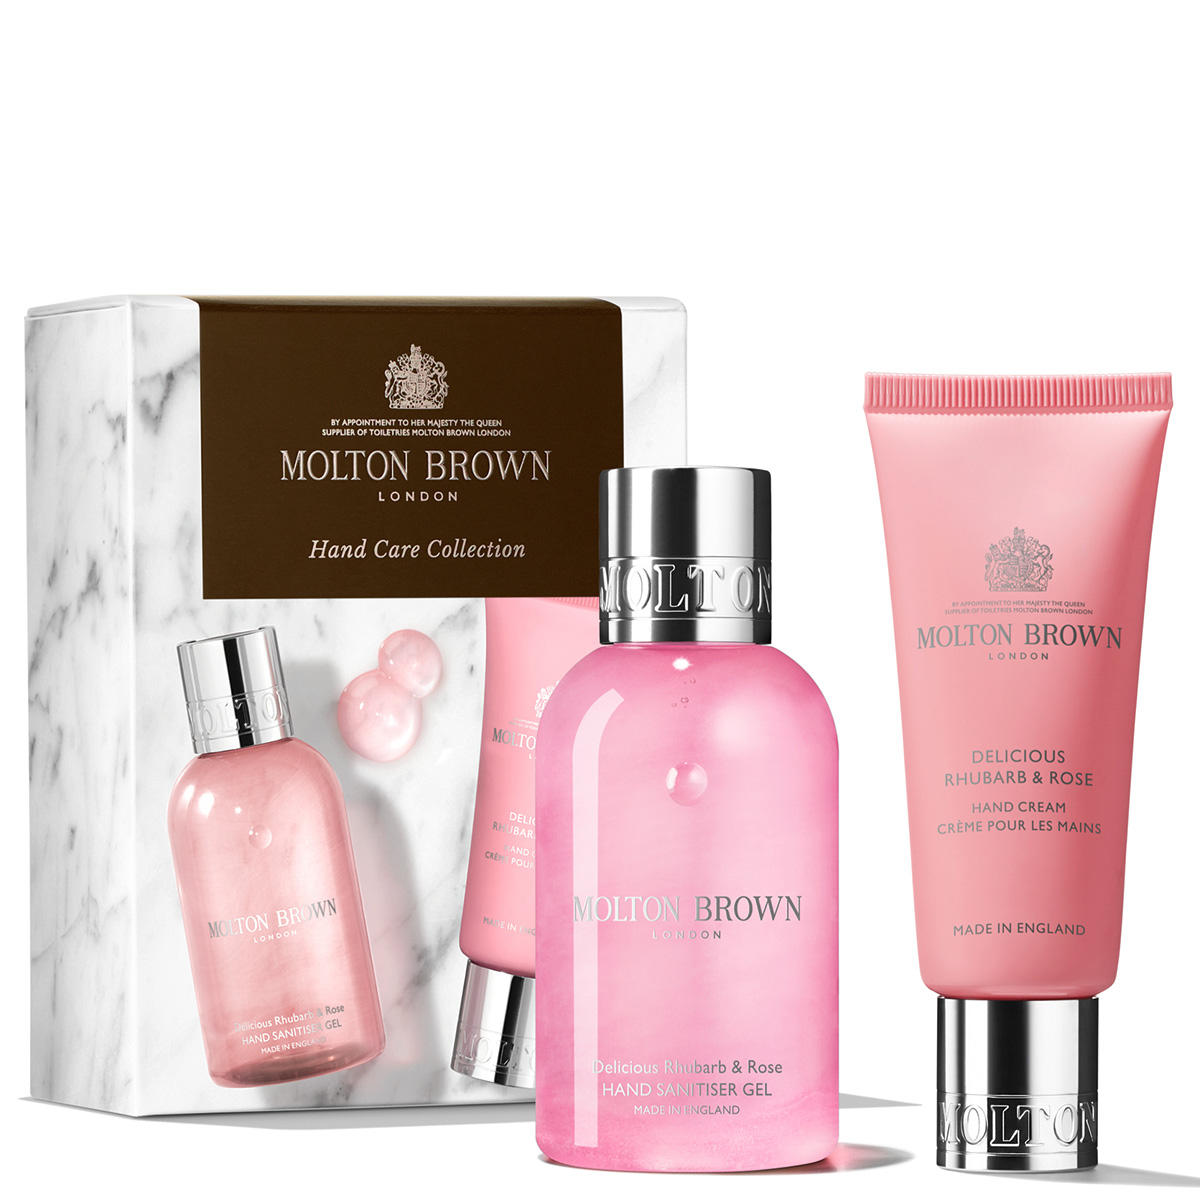 MOLTON BROWN Delicious Rhubarb & Rose Hand Care Travel Set  - 1